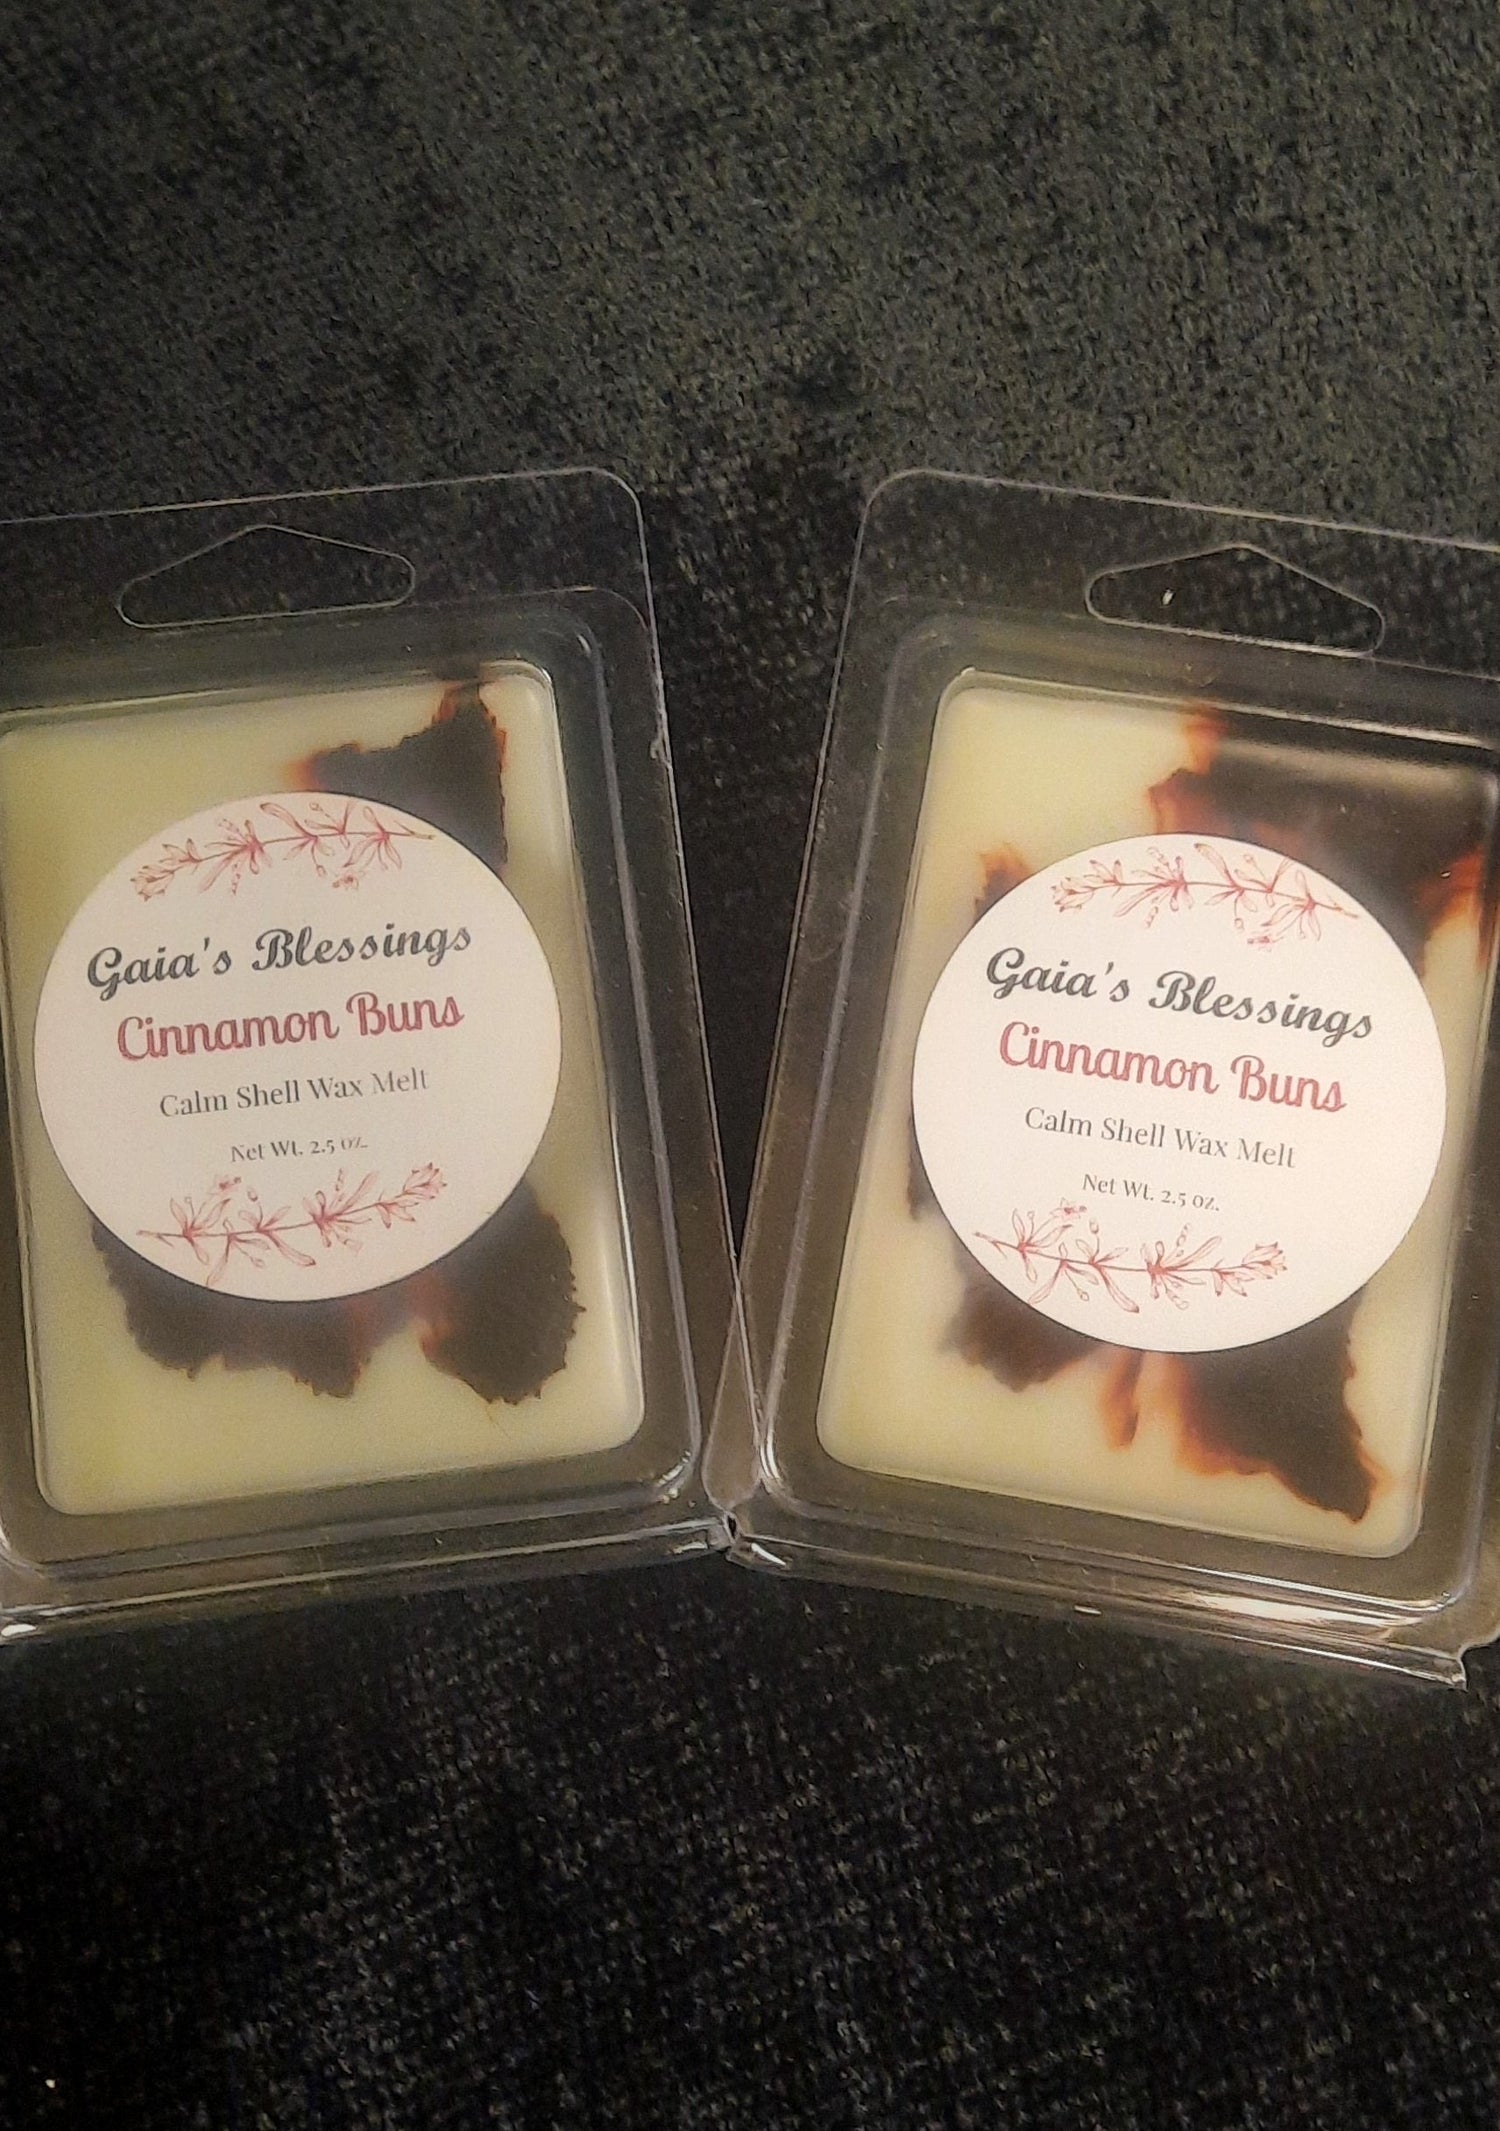 2.5 oz clam shell wax melt with the fragrance of cinnamon buns.  Let your favorite scent of cinnamon overtake you.